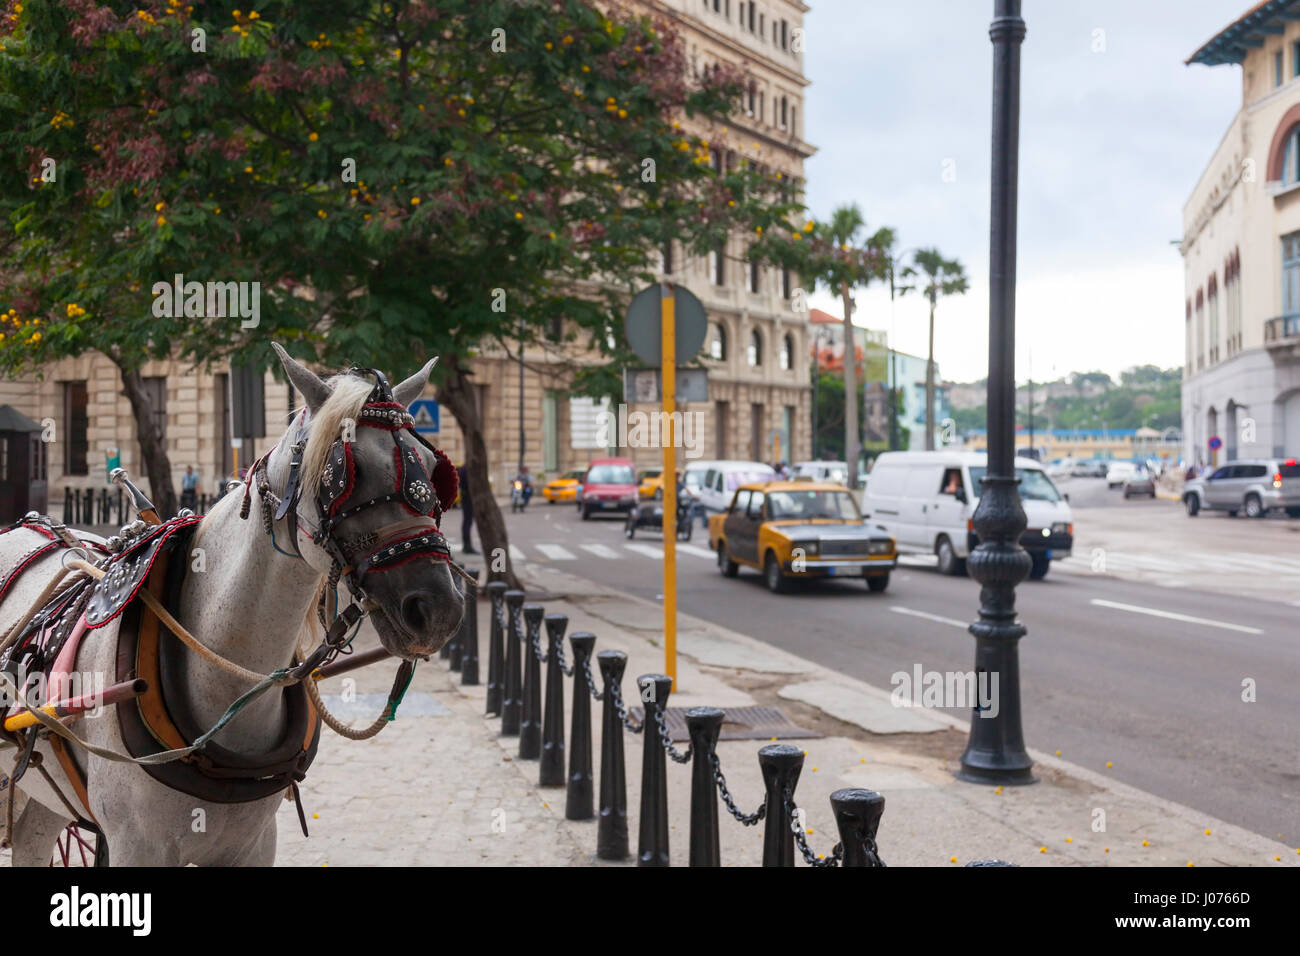 A horse Equus ferus caballus wearing a harness to pull a wagon at Plaza de San Francisco with cars driving by along the Malecon in Old Havana, Cuba. Stock Photo